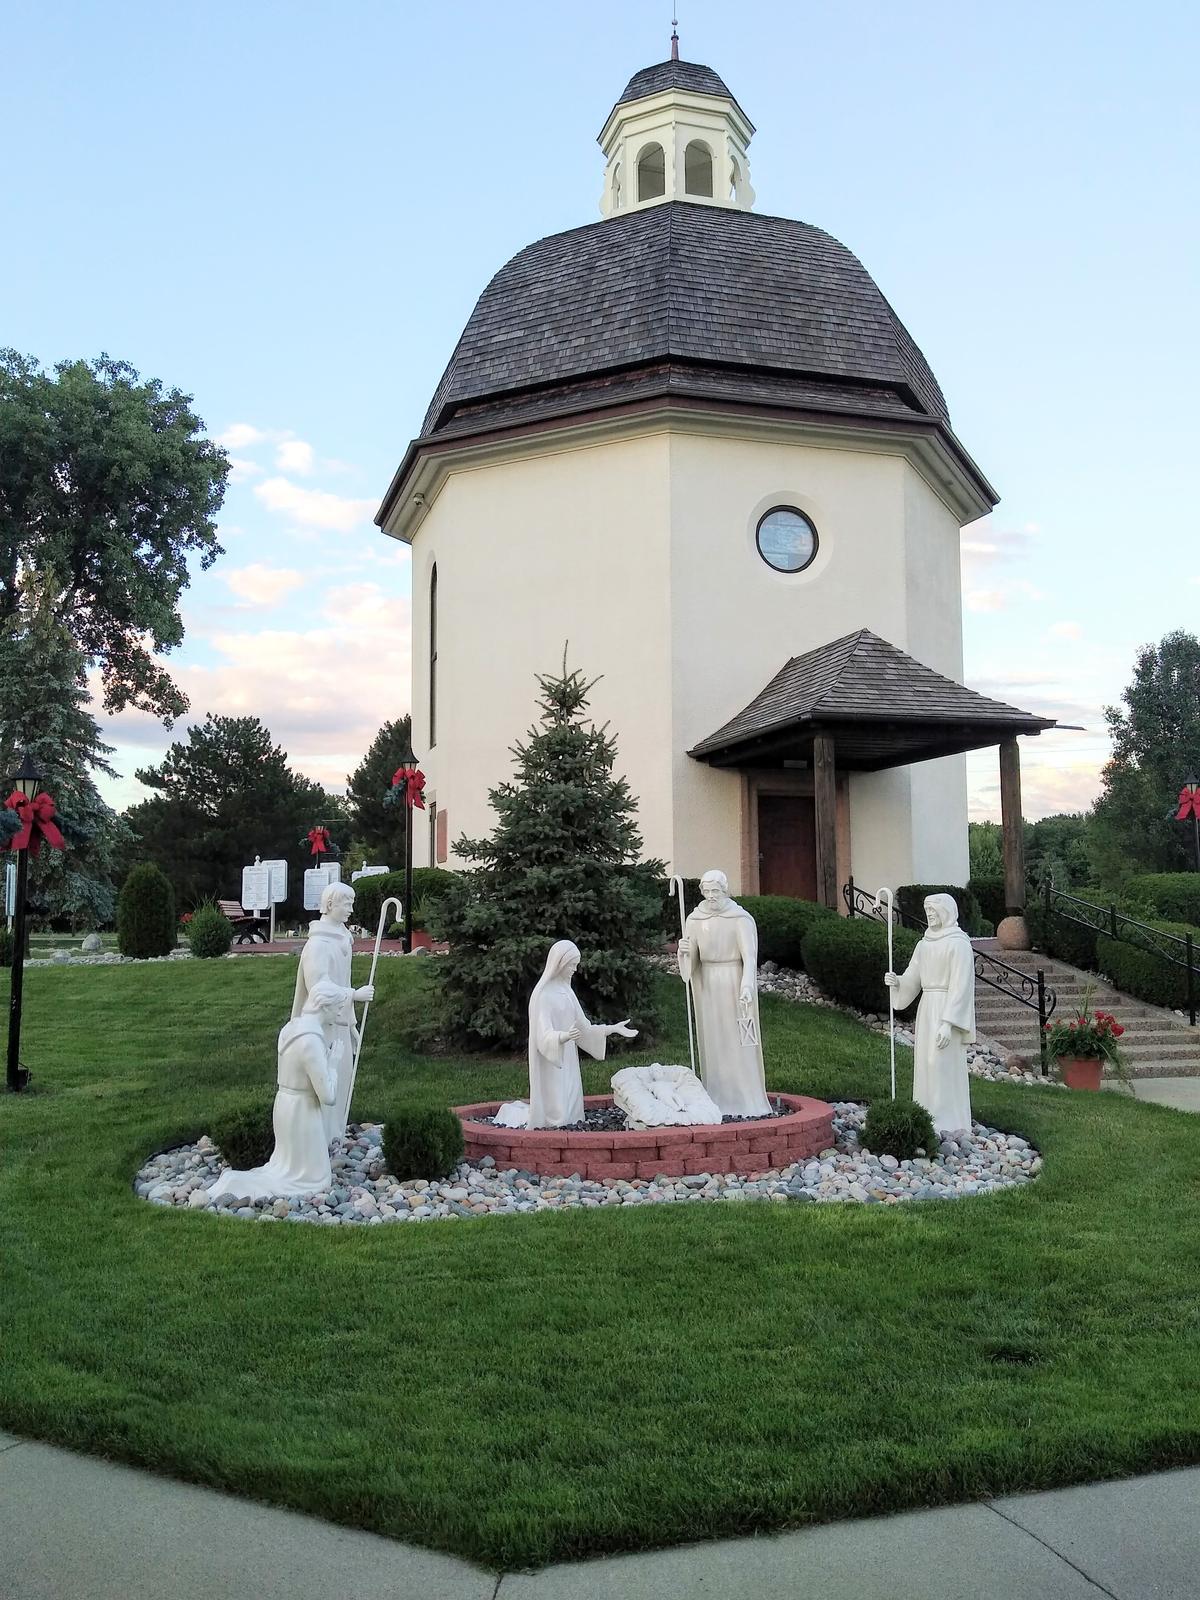 The Silent Night Chapel, located at Bronner's CHRISTmas Wonderland in Frankenmuth, Mich., is a replica of the original chapel in Oberndorf, Austria. (Courtesy of Dean George)